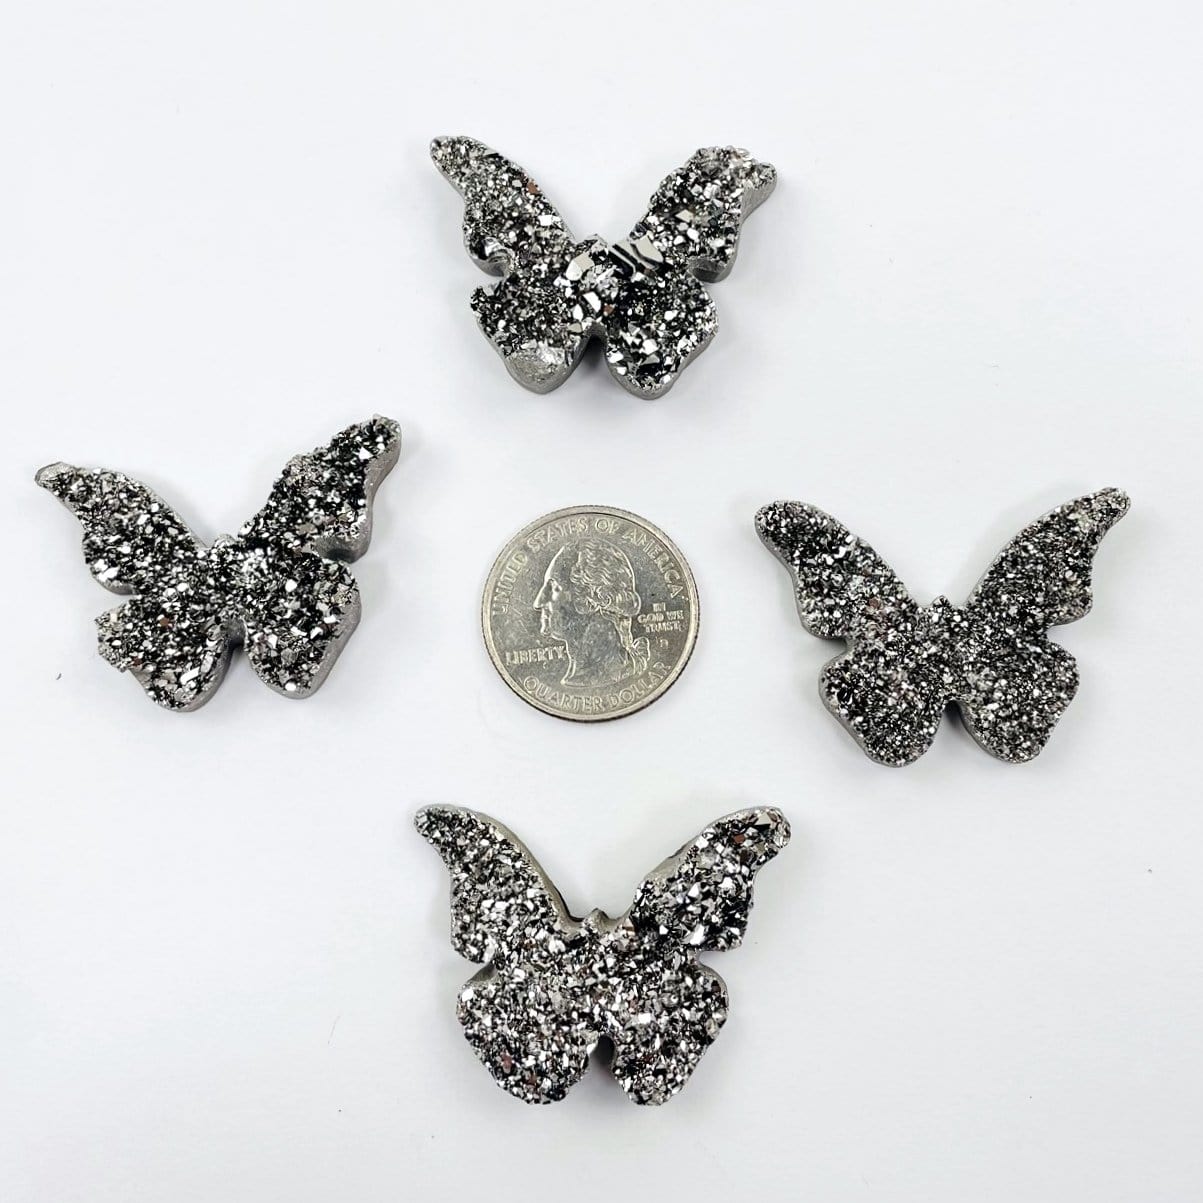 Platinum Titanium Druzy Butterfly Cabochons displayed around quarter for size reference